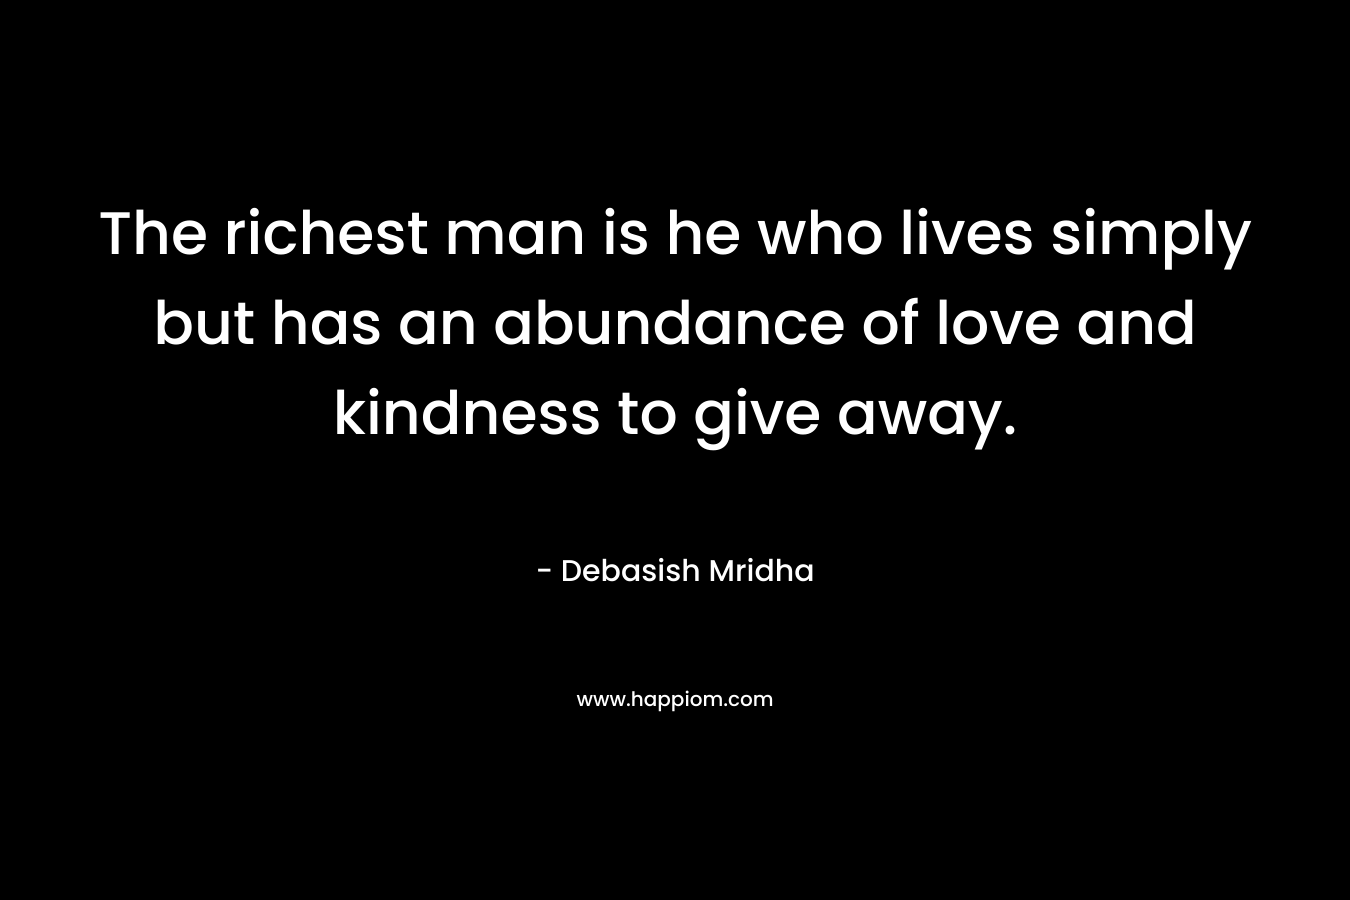 The richest man is he who lives simply but has an abundance of love and kindness to give away. – Debasish Mridha